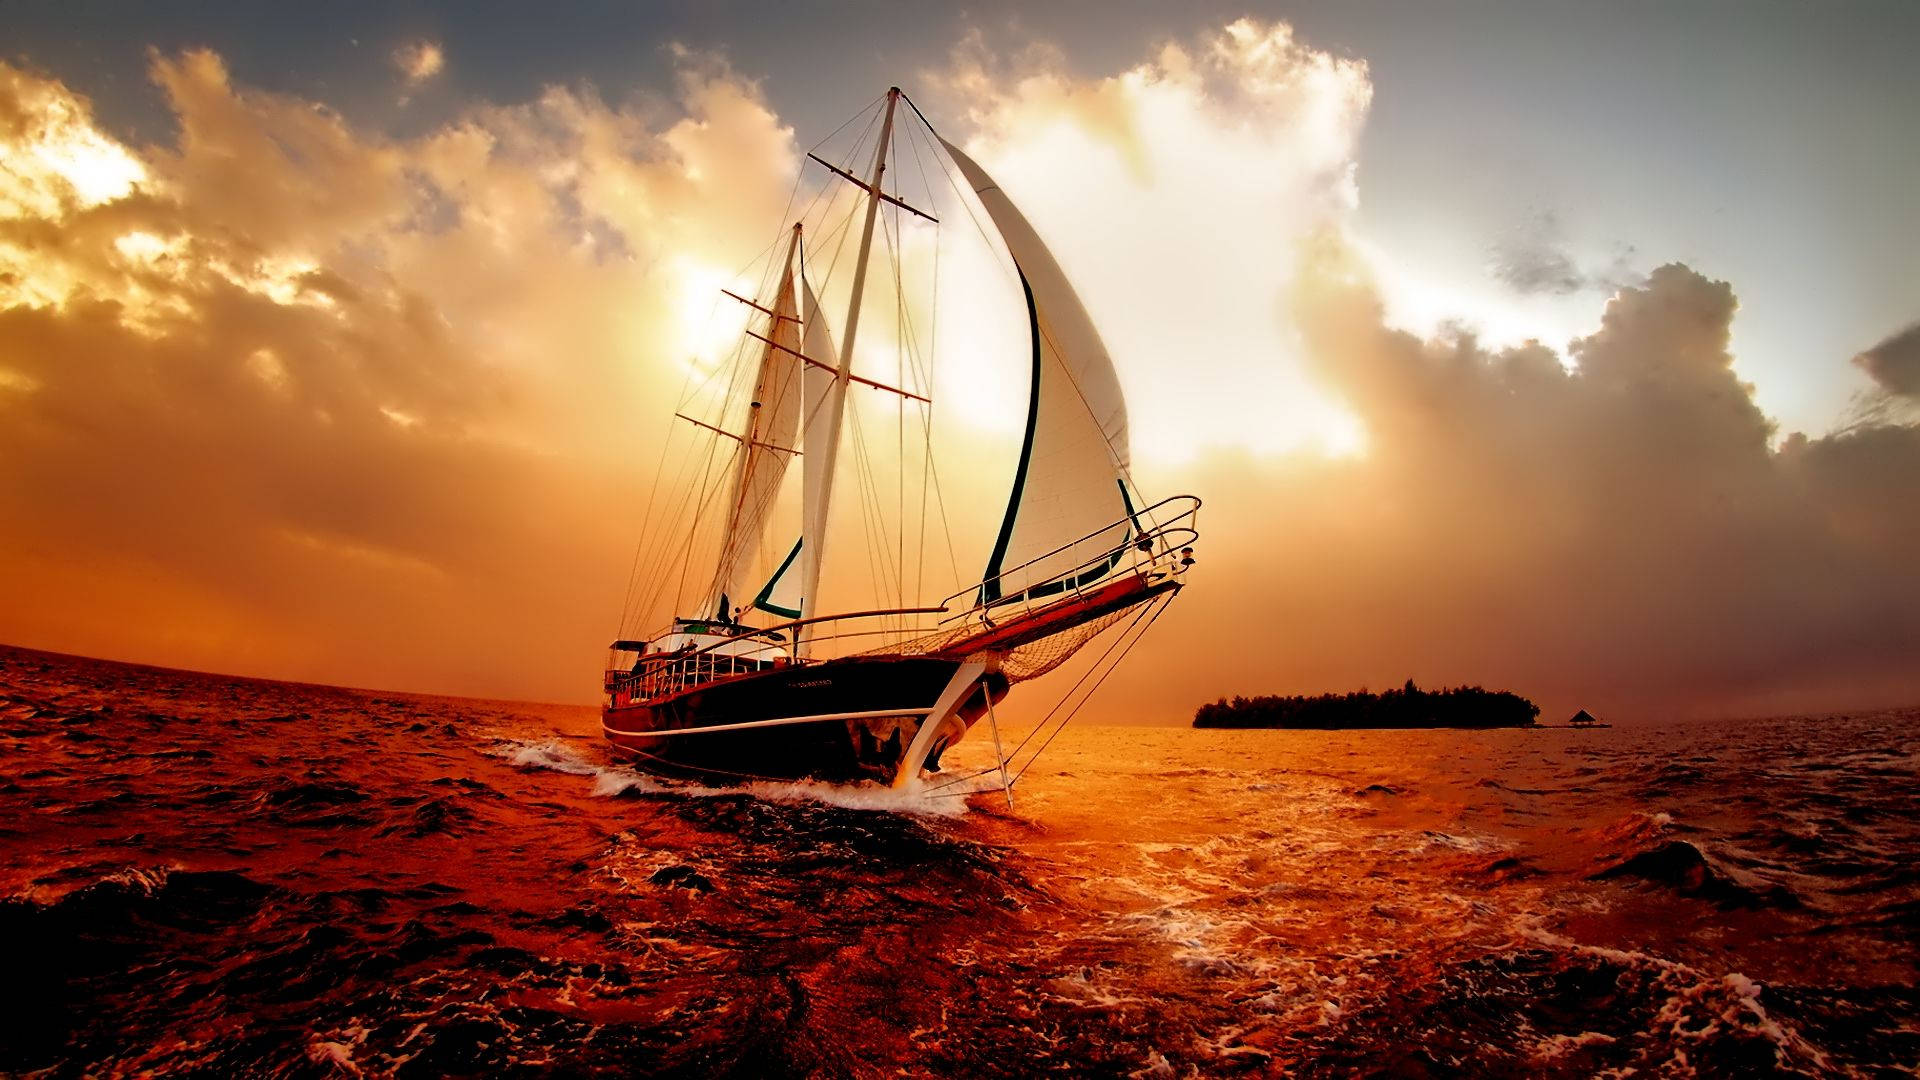 Download Hd Ship In The Sea Sunset Wallpaper 